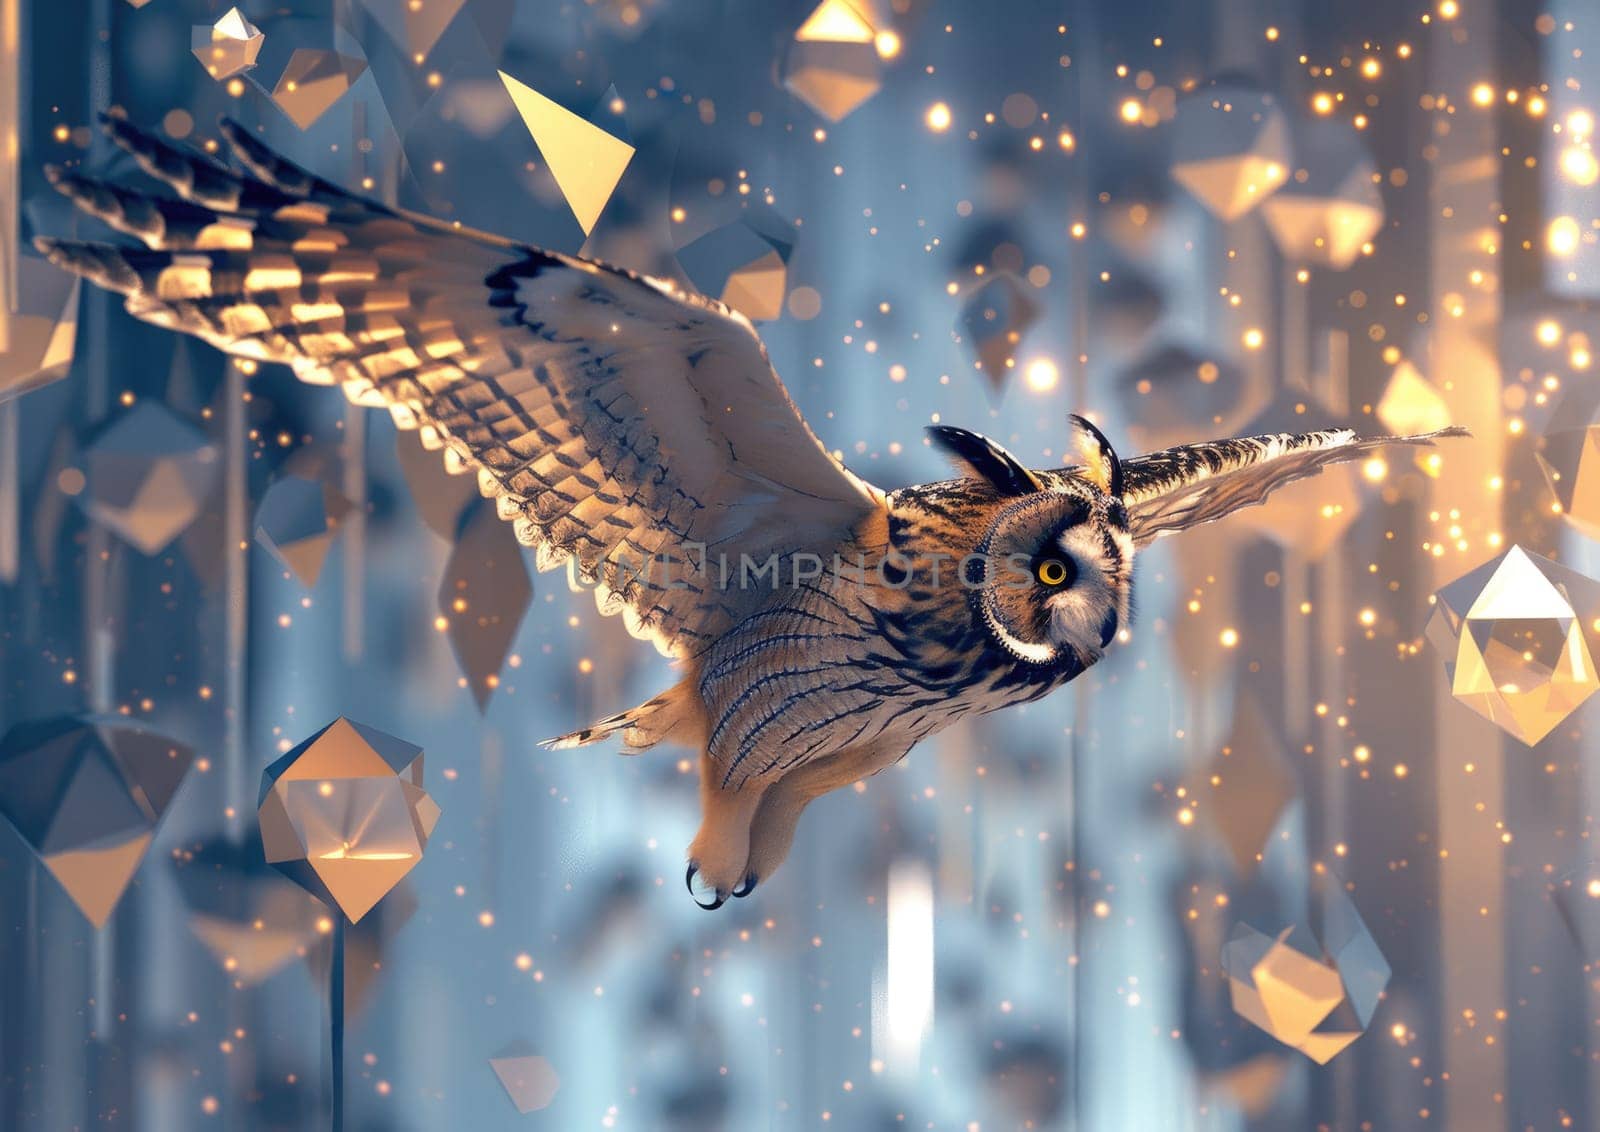 Long-eared Owl in mid-flight, its wings leaving a trail of stardust as it soars through a surreal, geometric landscape by Chawagen